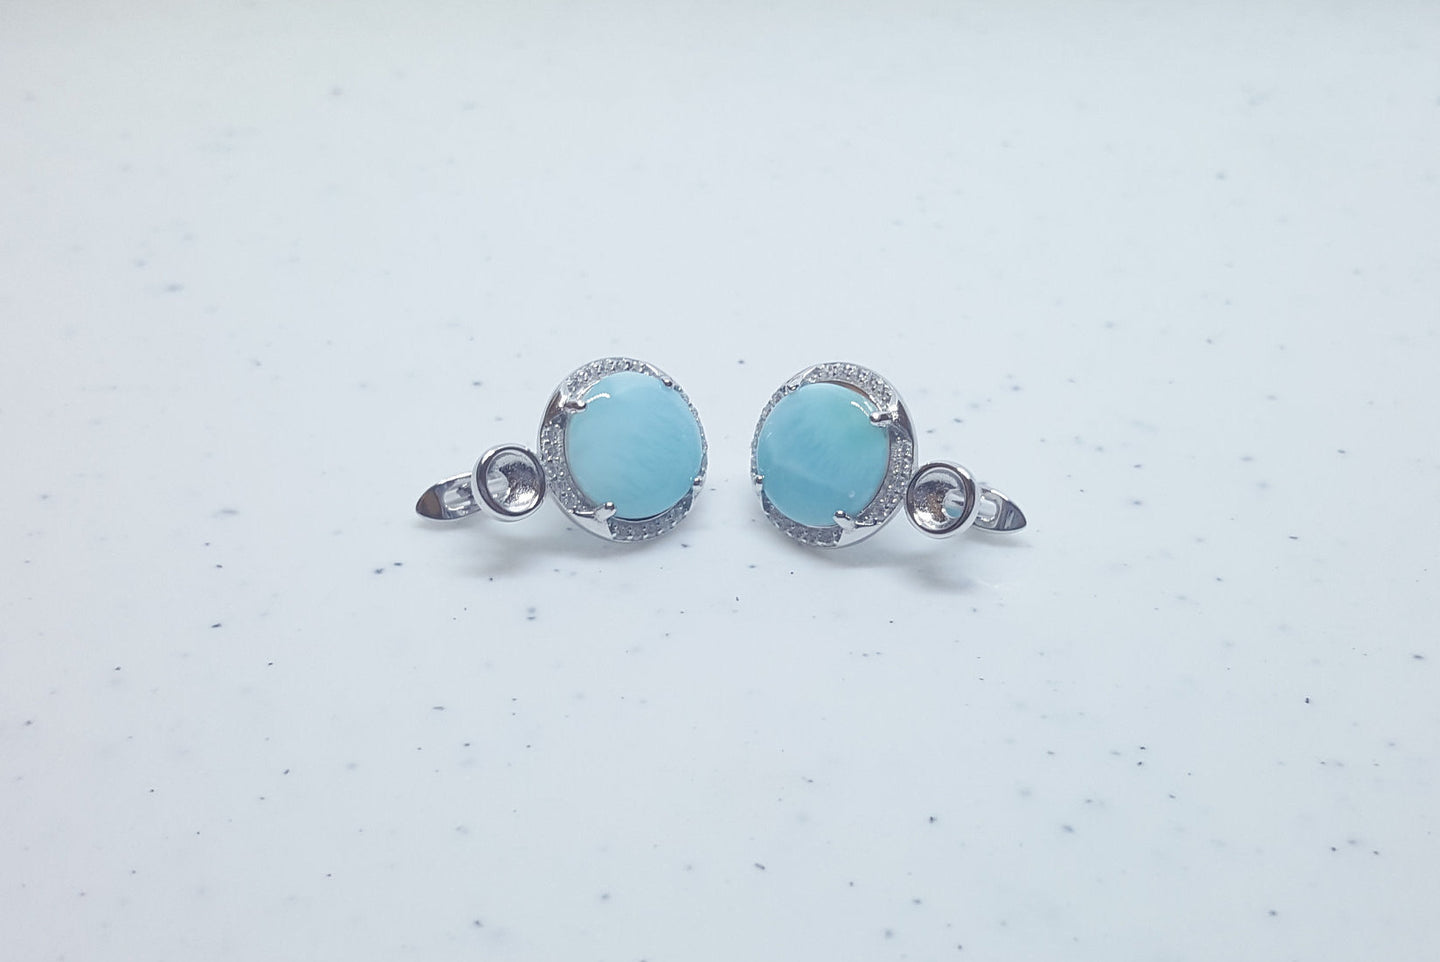 10 mm Blue Larimar with CZ round shape sterling silver hoop earrings